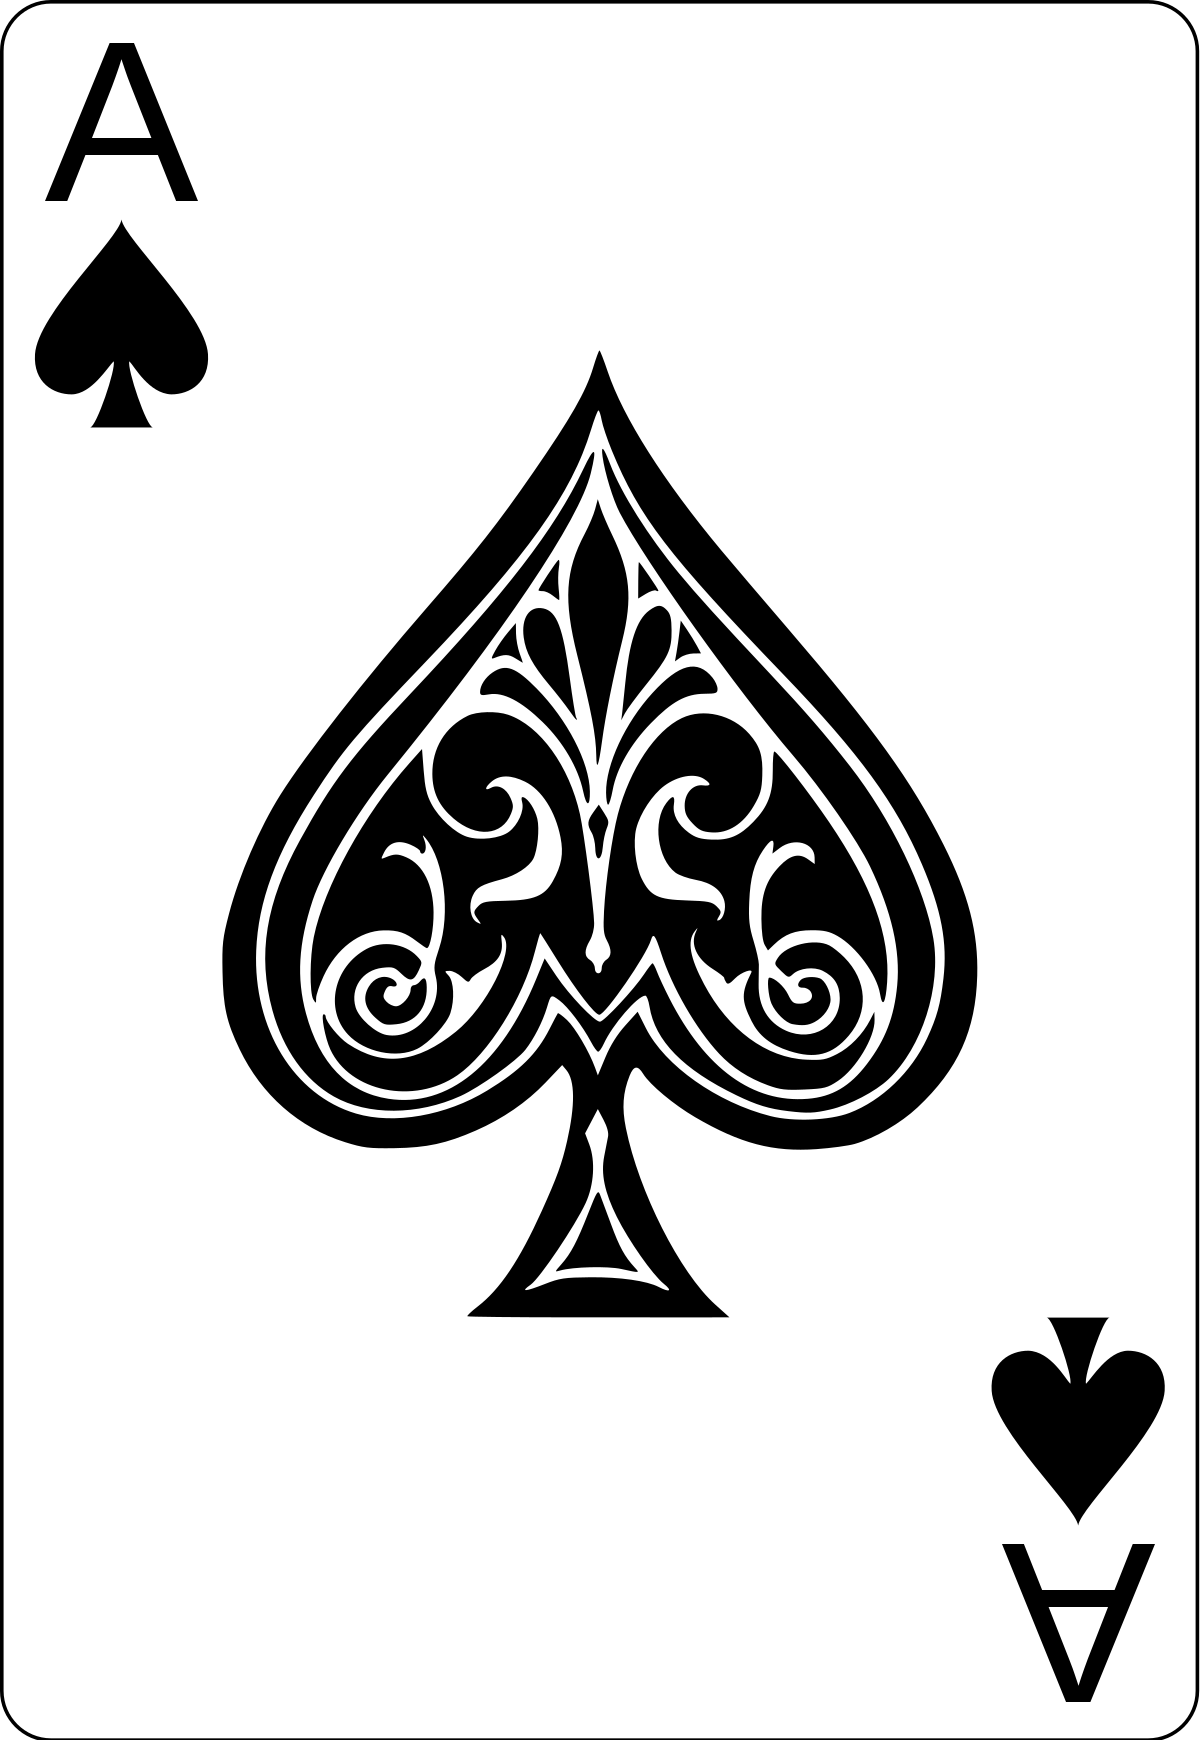 1200px-Ace_of_spades.svg.png